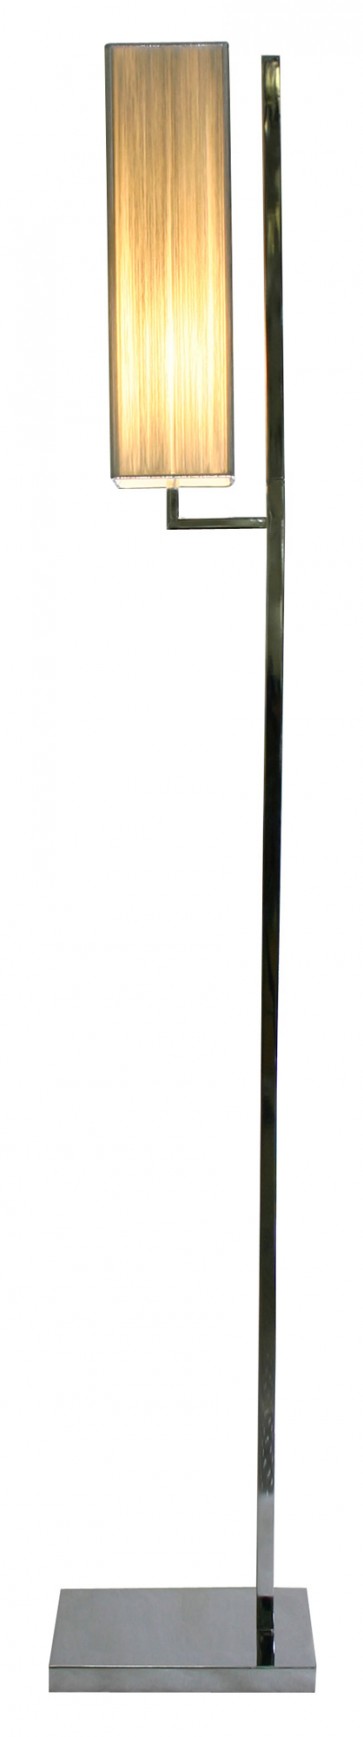 Clico Silver String Floor Lamp V M Imports